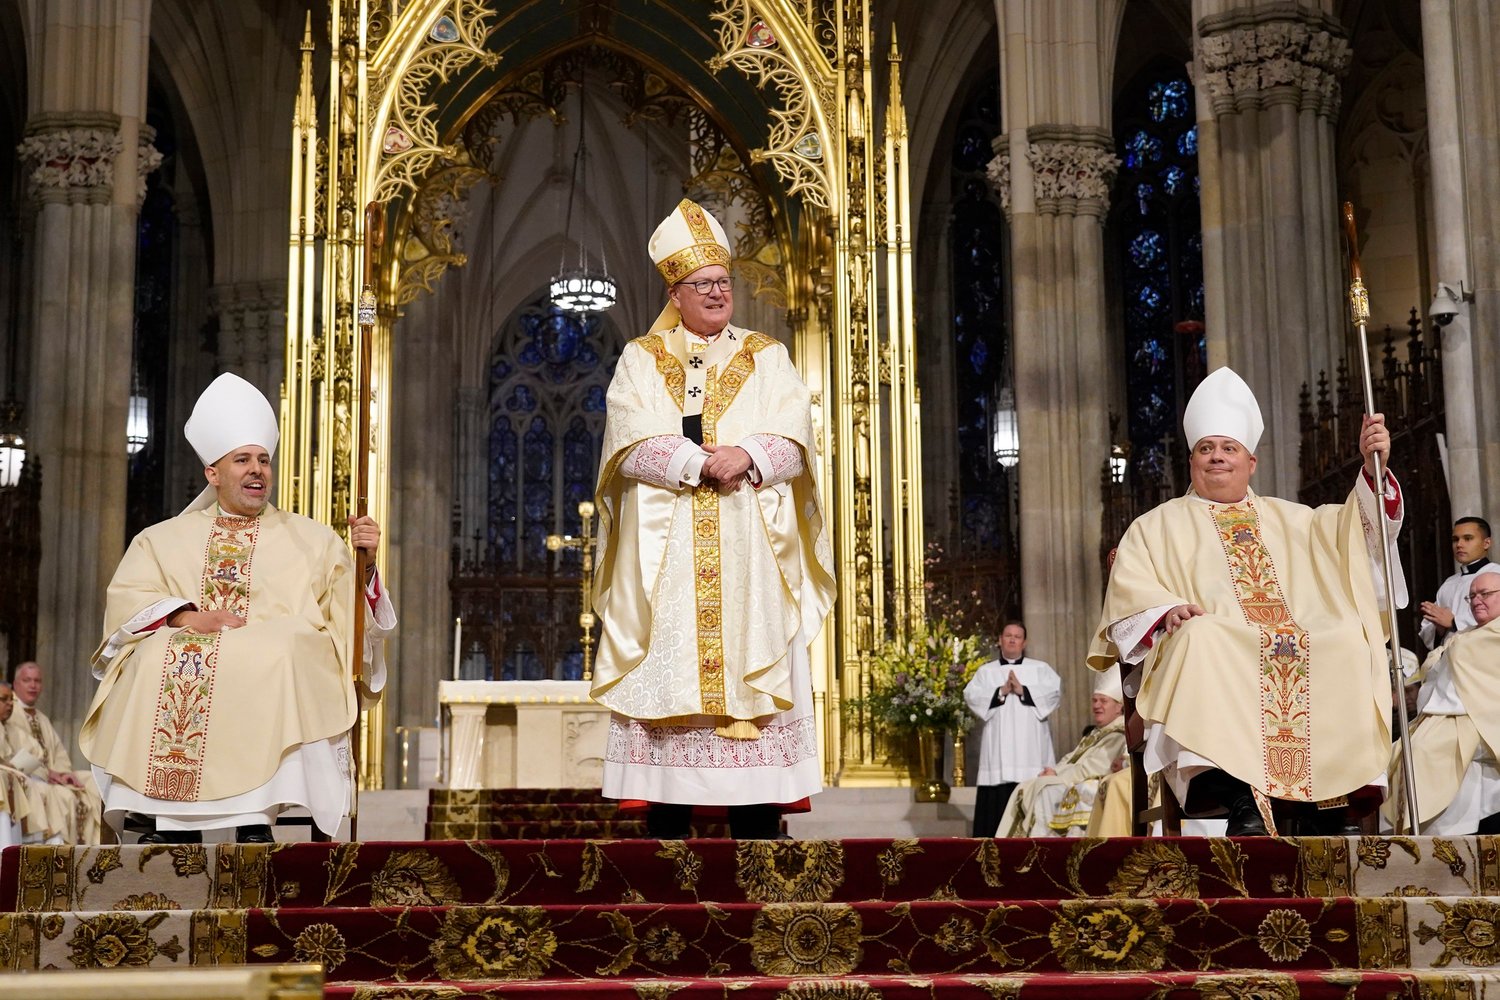 Cardinal Dolan is flanked by his new Auxiliary Bishops Joseph A. Espaillat and John S. Bonnici after he ordained them as bishops March 1 at St. Patrick's Cathedral.